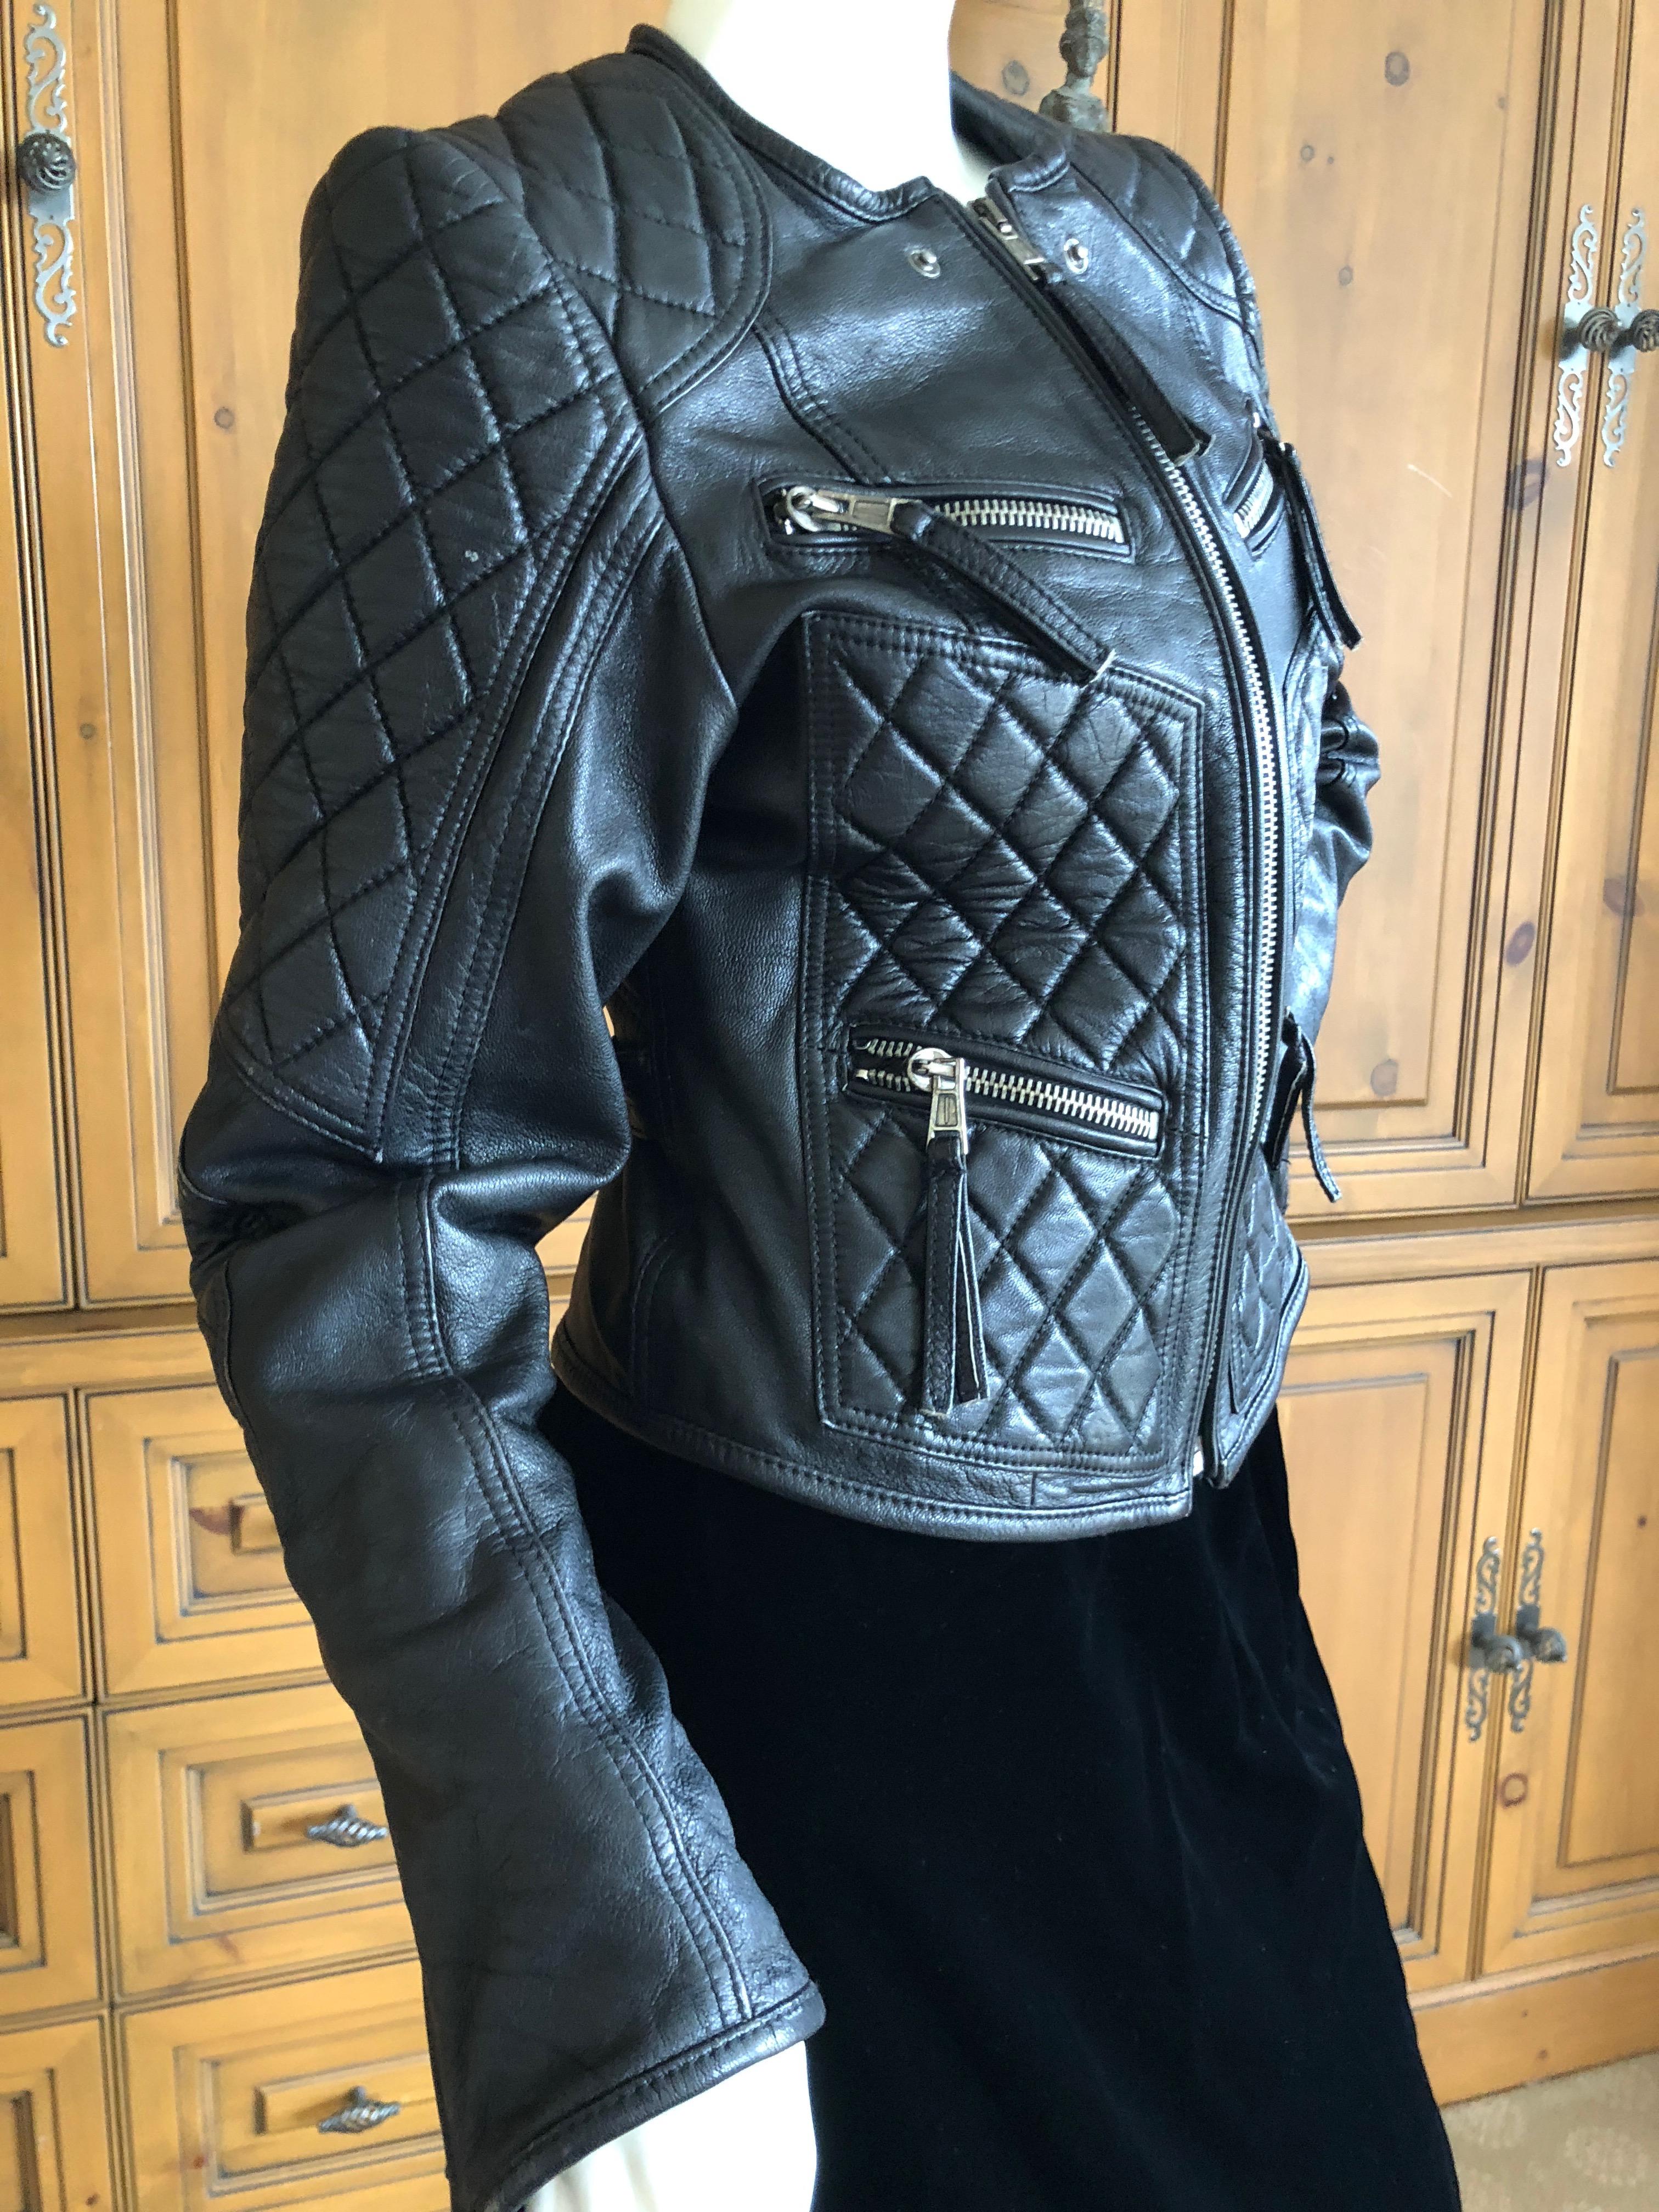 Just Cavalli by Roberto Cavalli Vintage Black Leather Quilted Motocross Zip Front Moto Jacket  .
So wonderful
 Size 40
 Bust 34